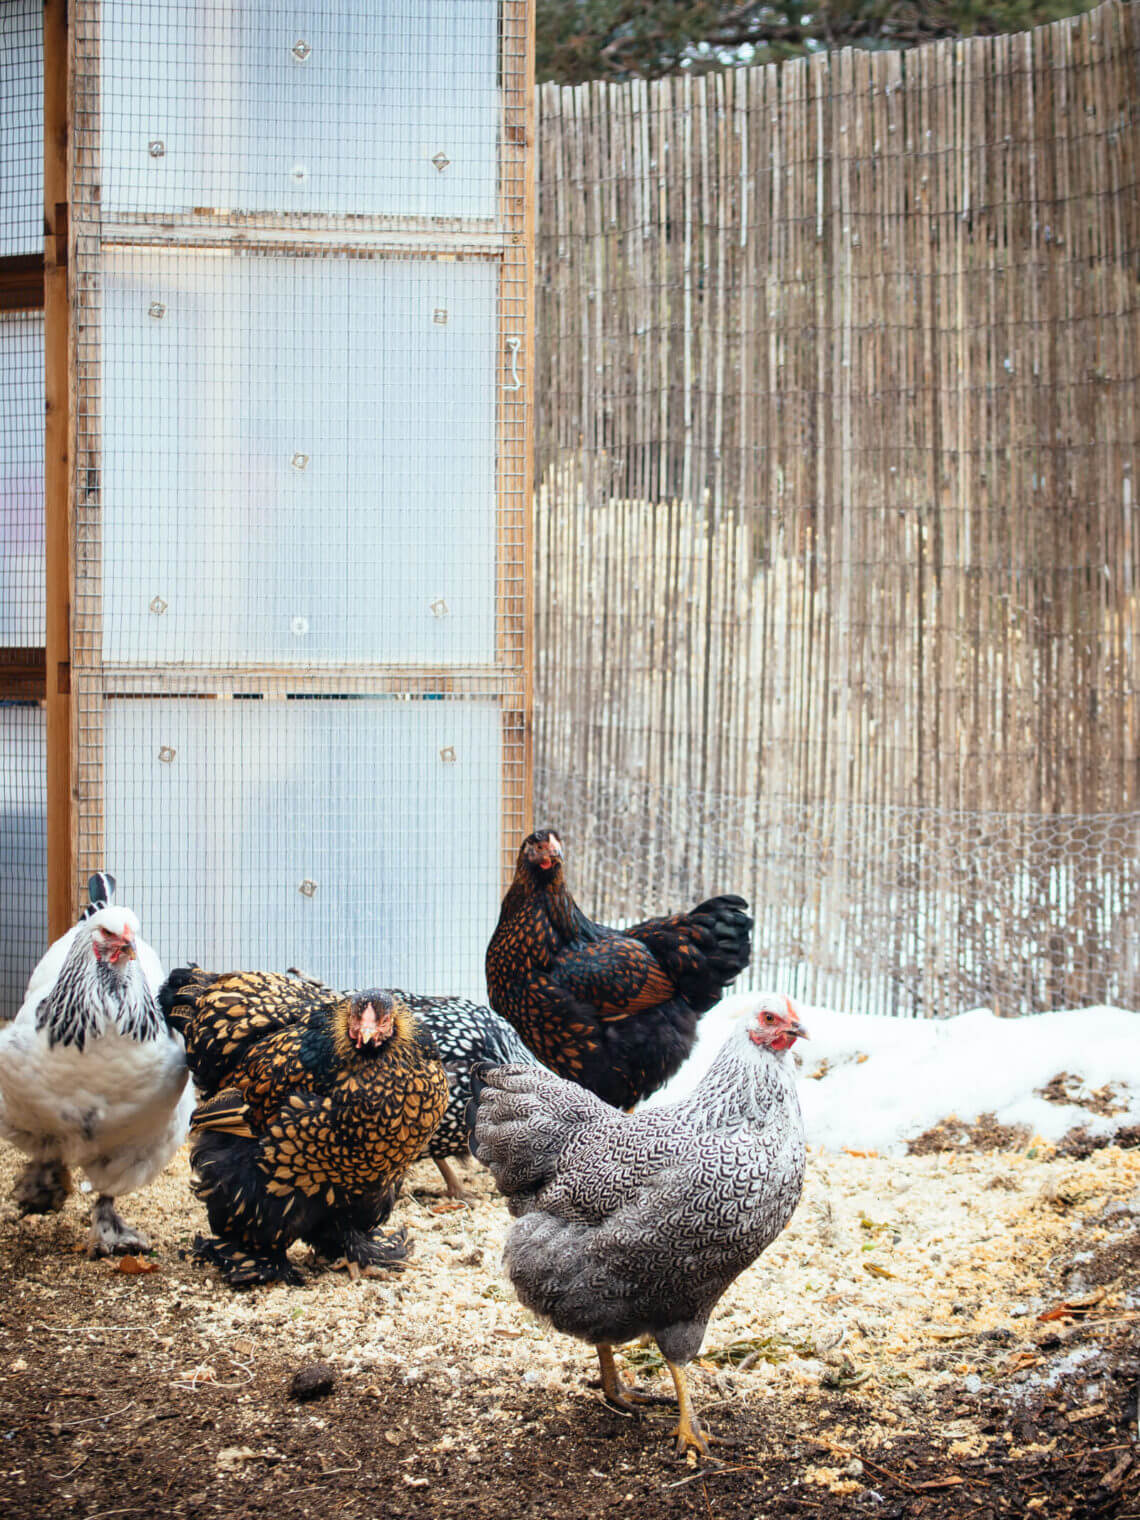 7 sure-fire tips and tricks for keeping your chickens healthy through winter